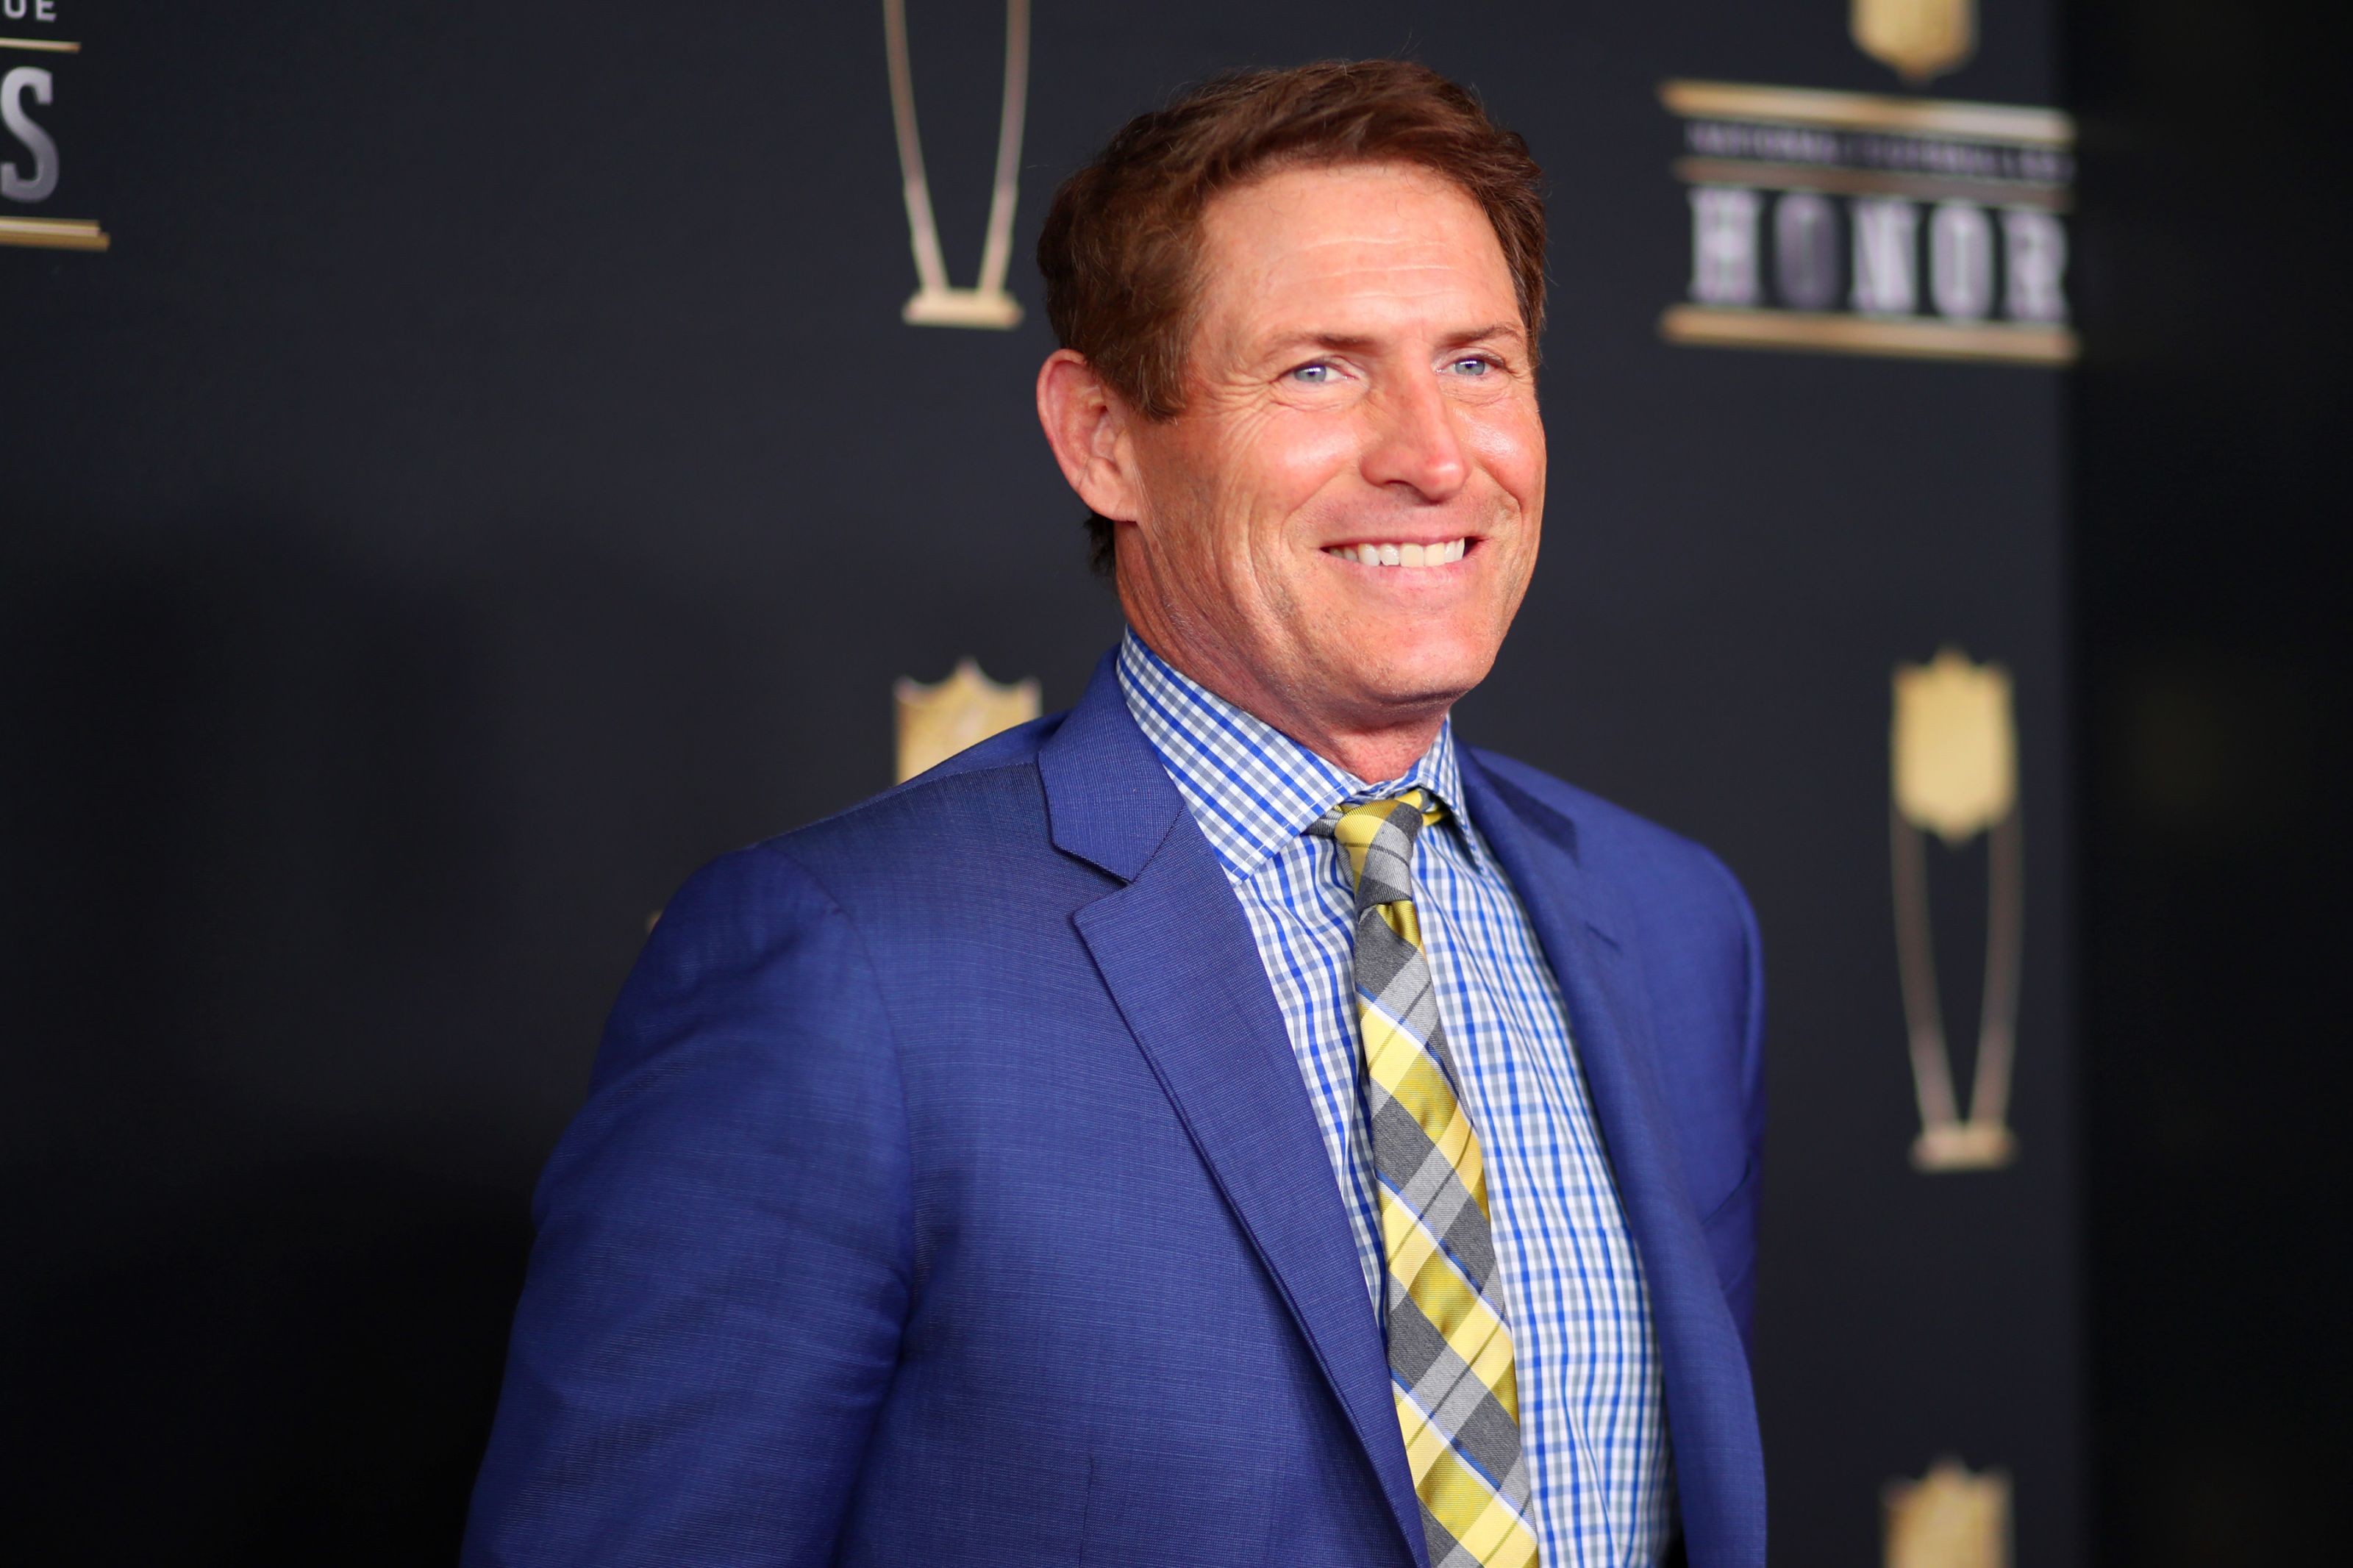 Hall of Fame QB Steve Young takes big shots at Miami Dolphins tanking